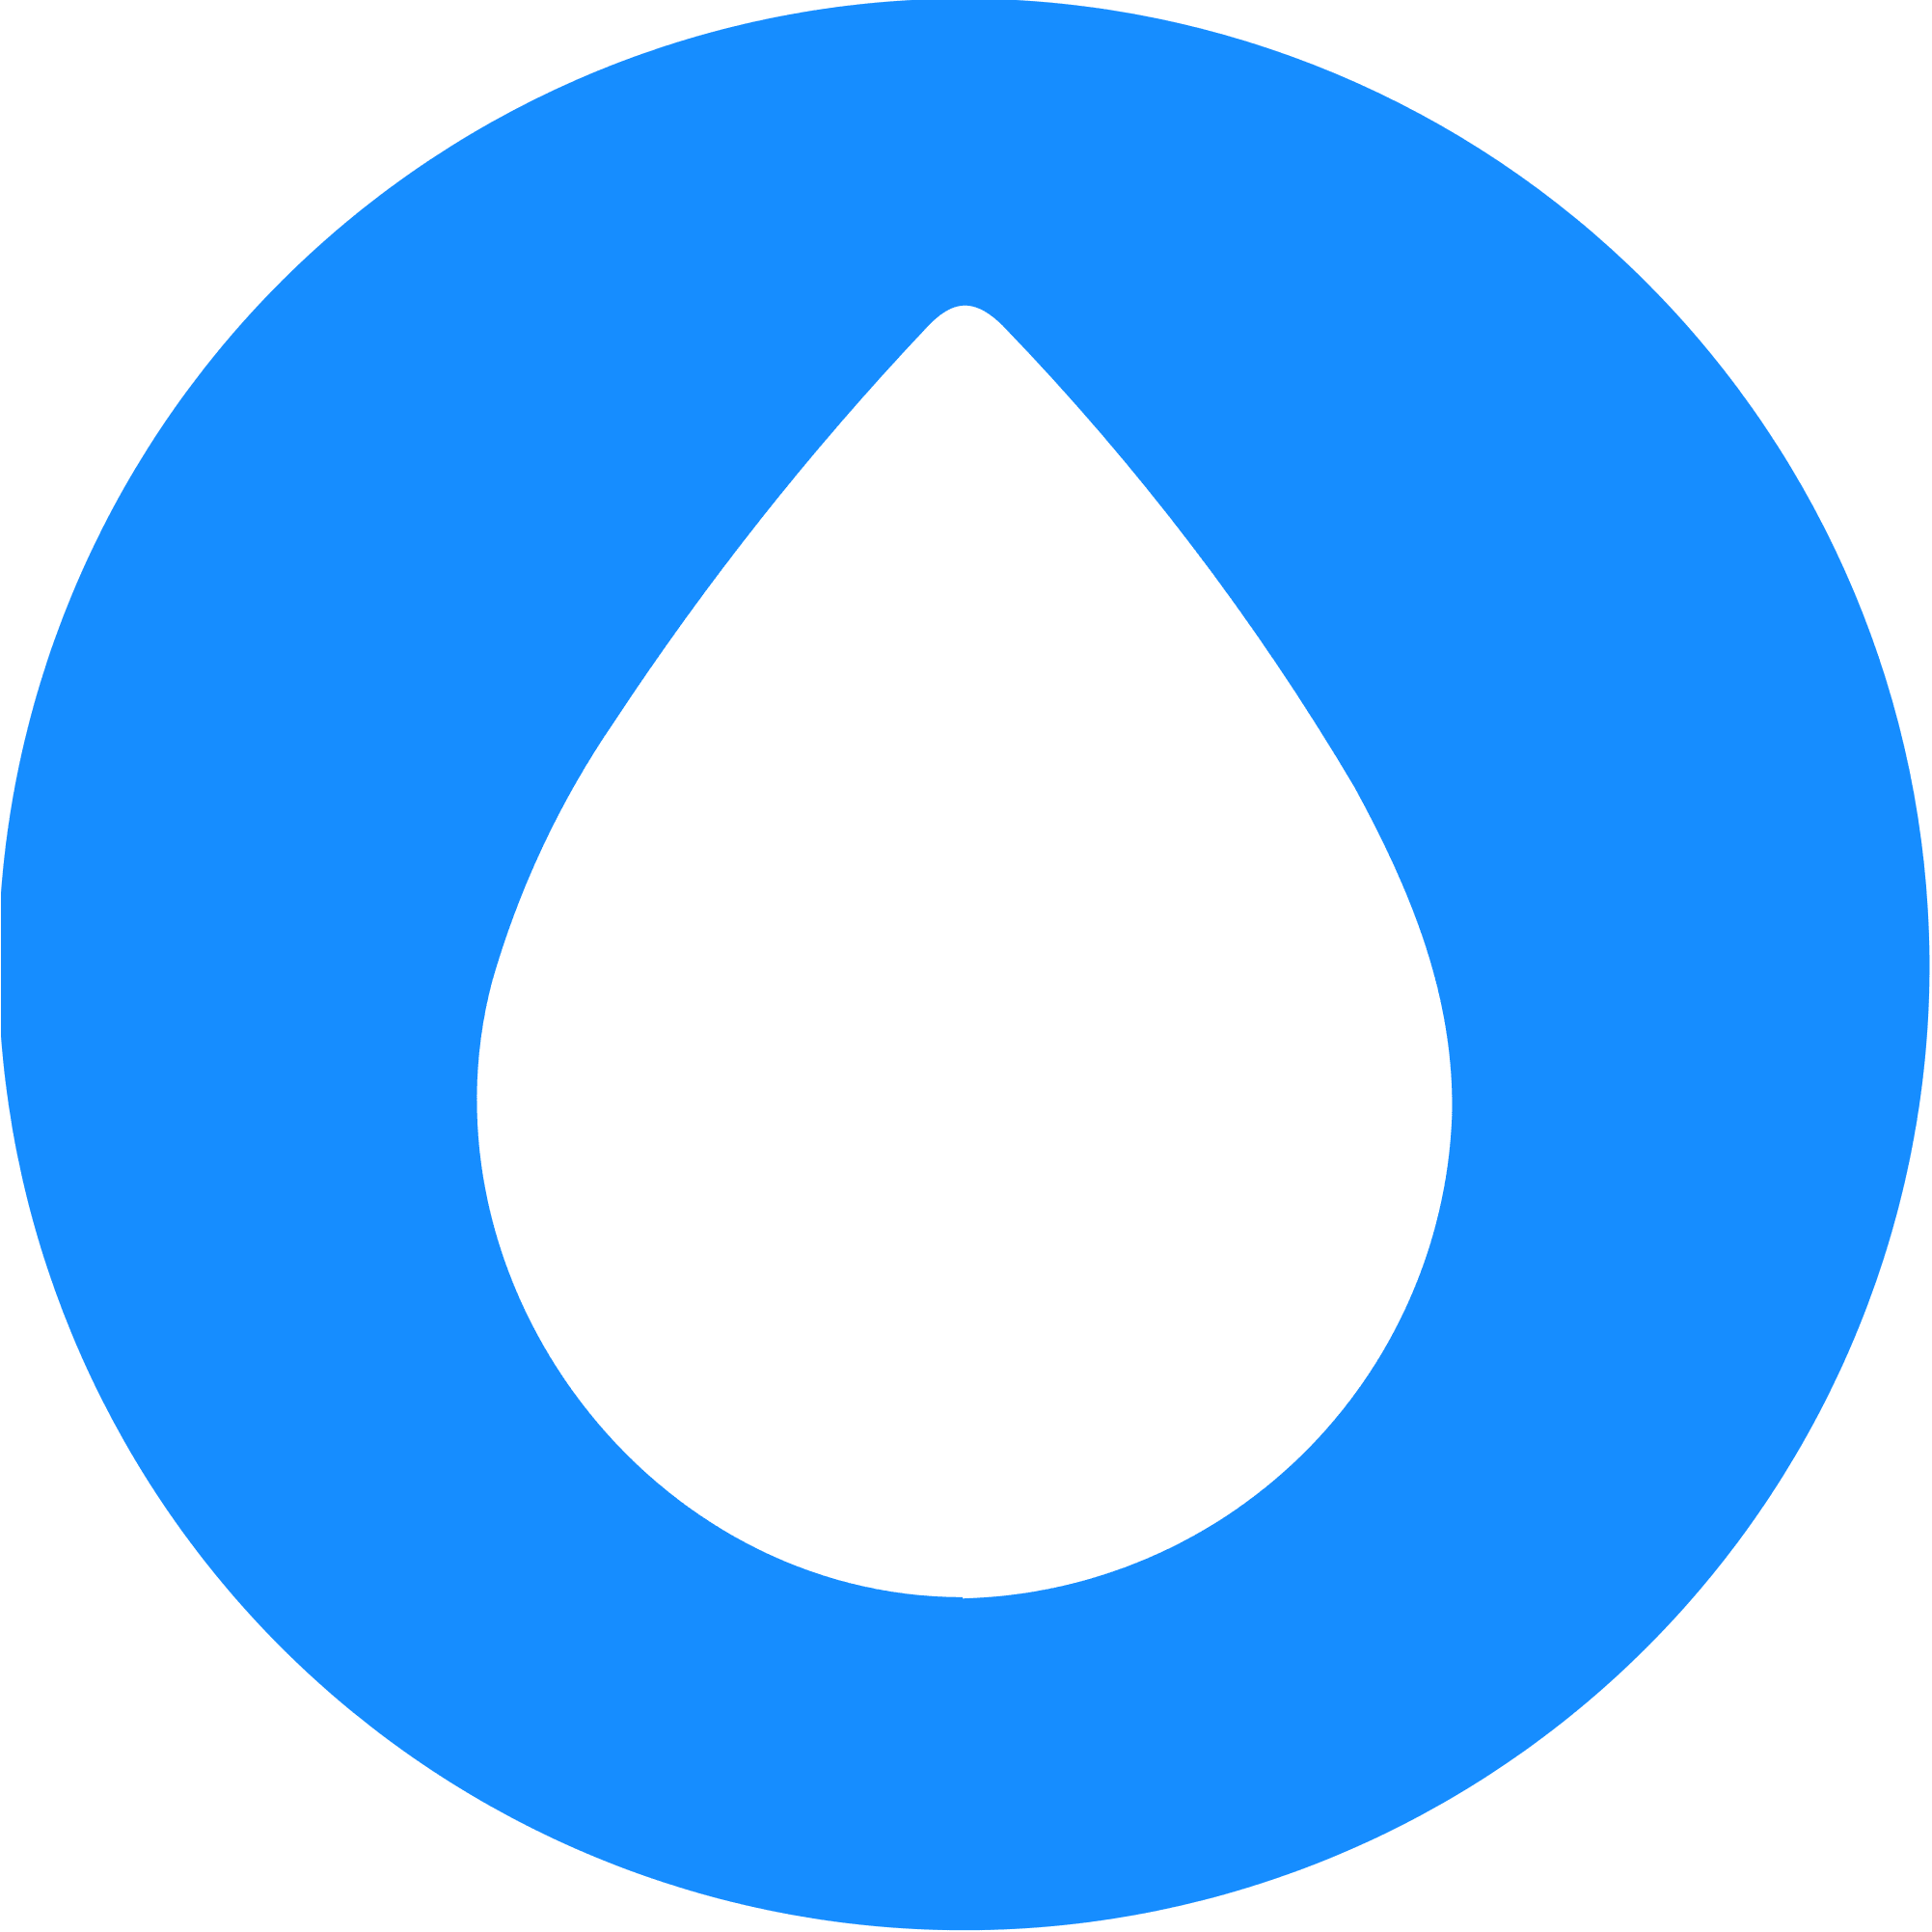 Hydro logo in png format